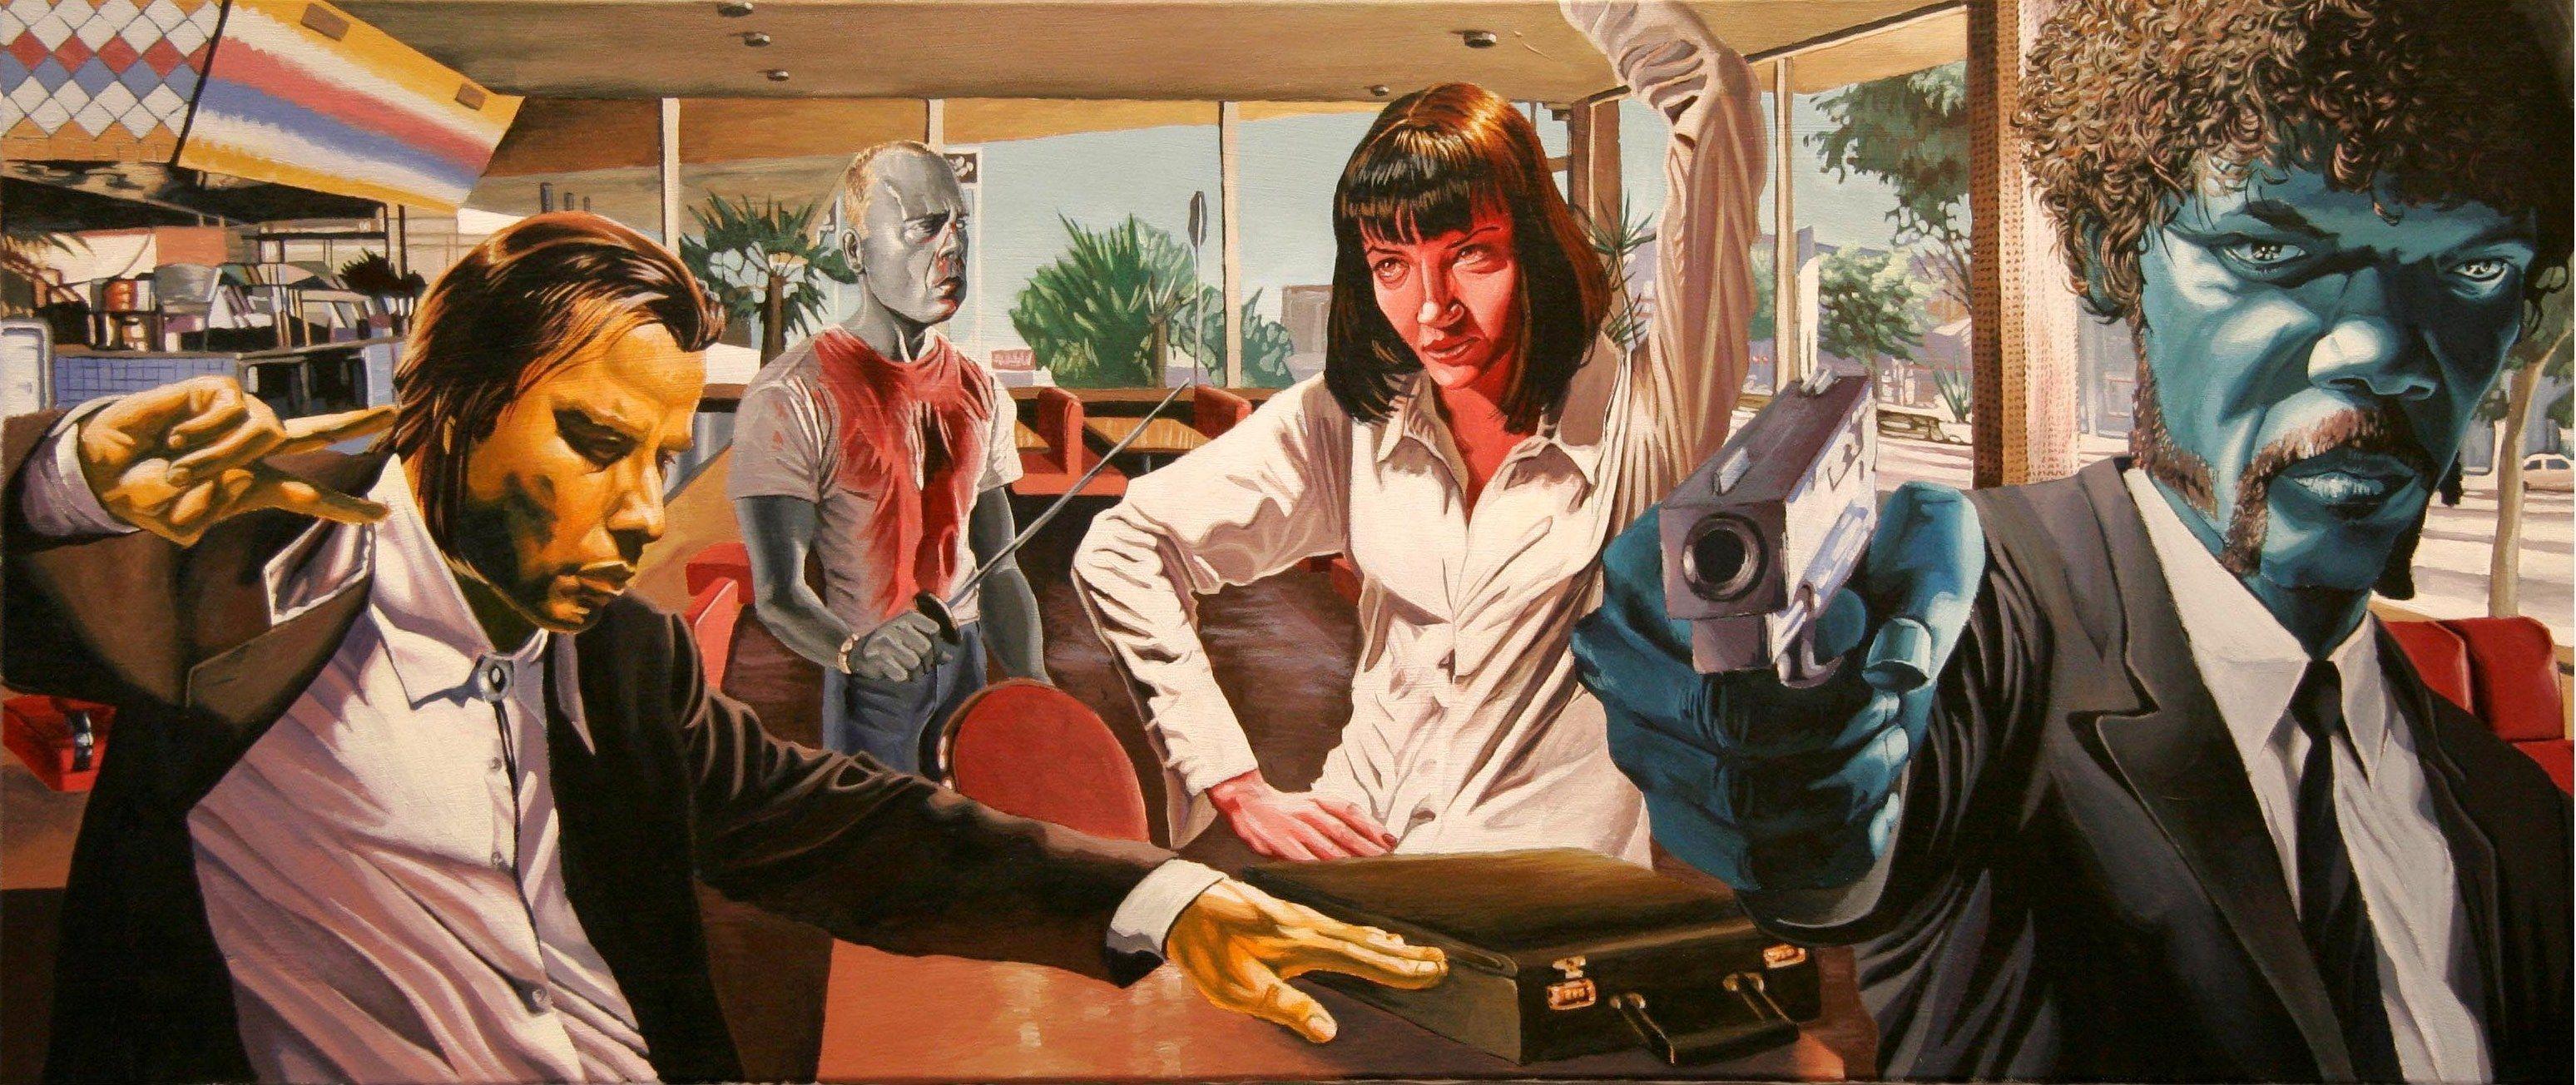 Pulp Fiction Dance Image For Background